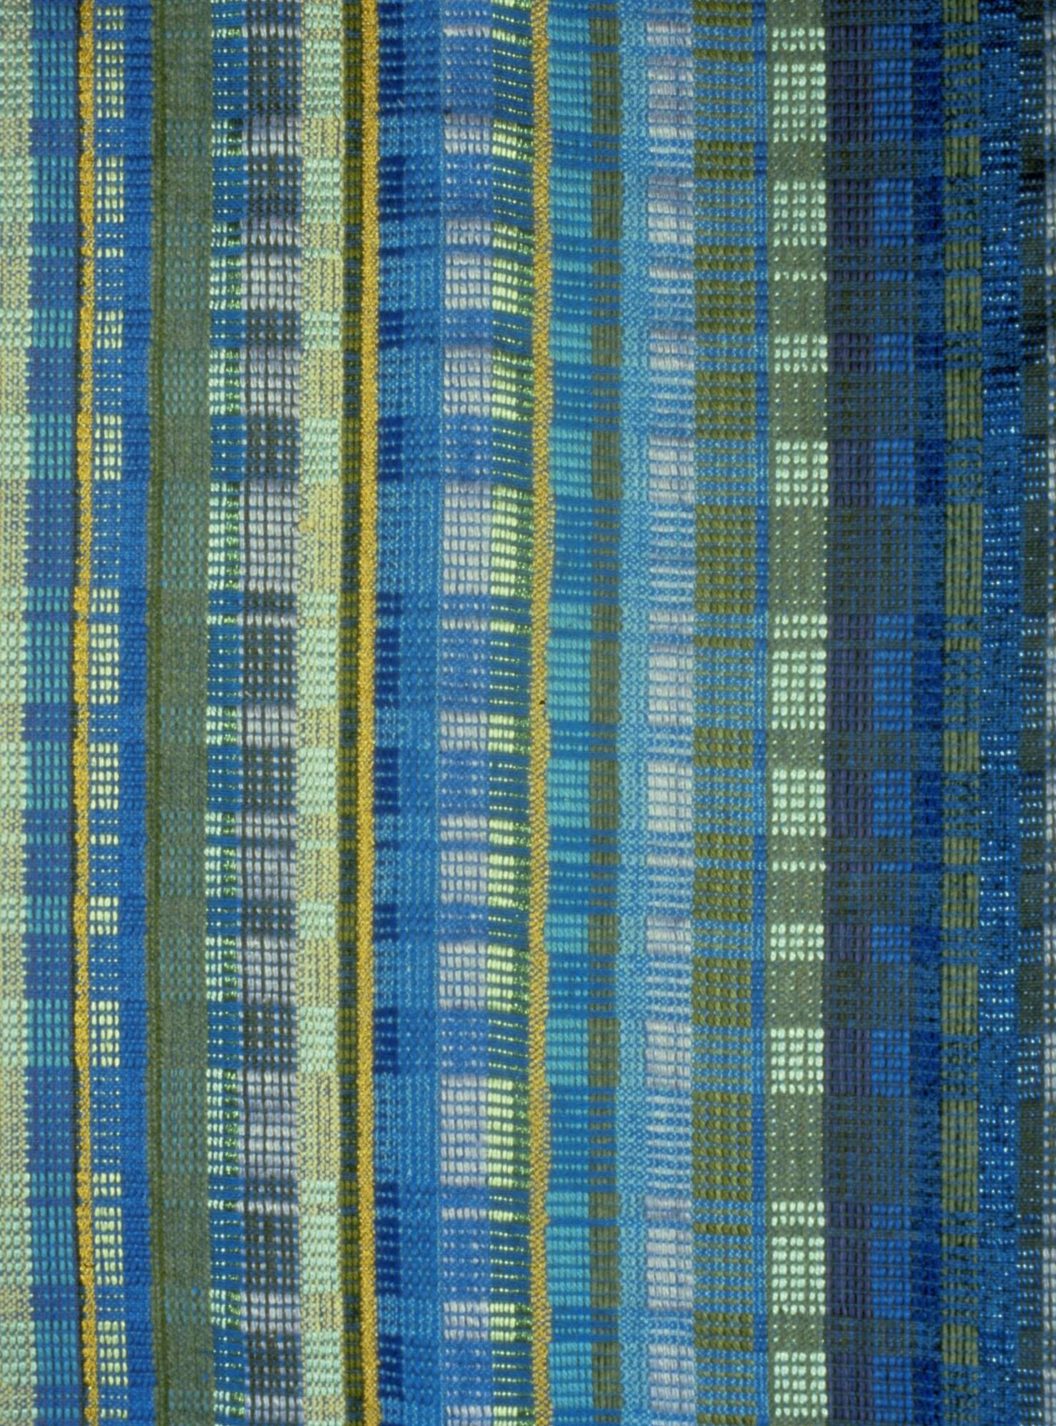 Textile with block pattern in various shades of blue, green, grey, and yellow.